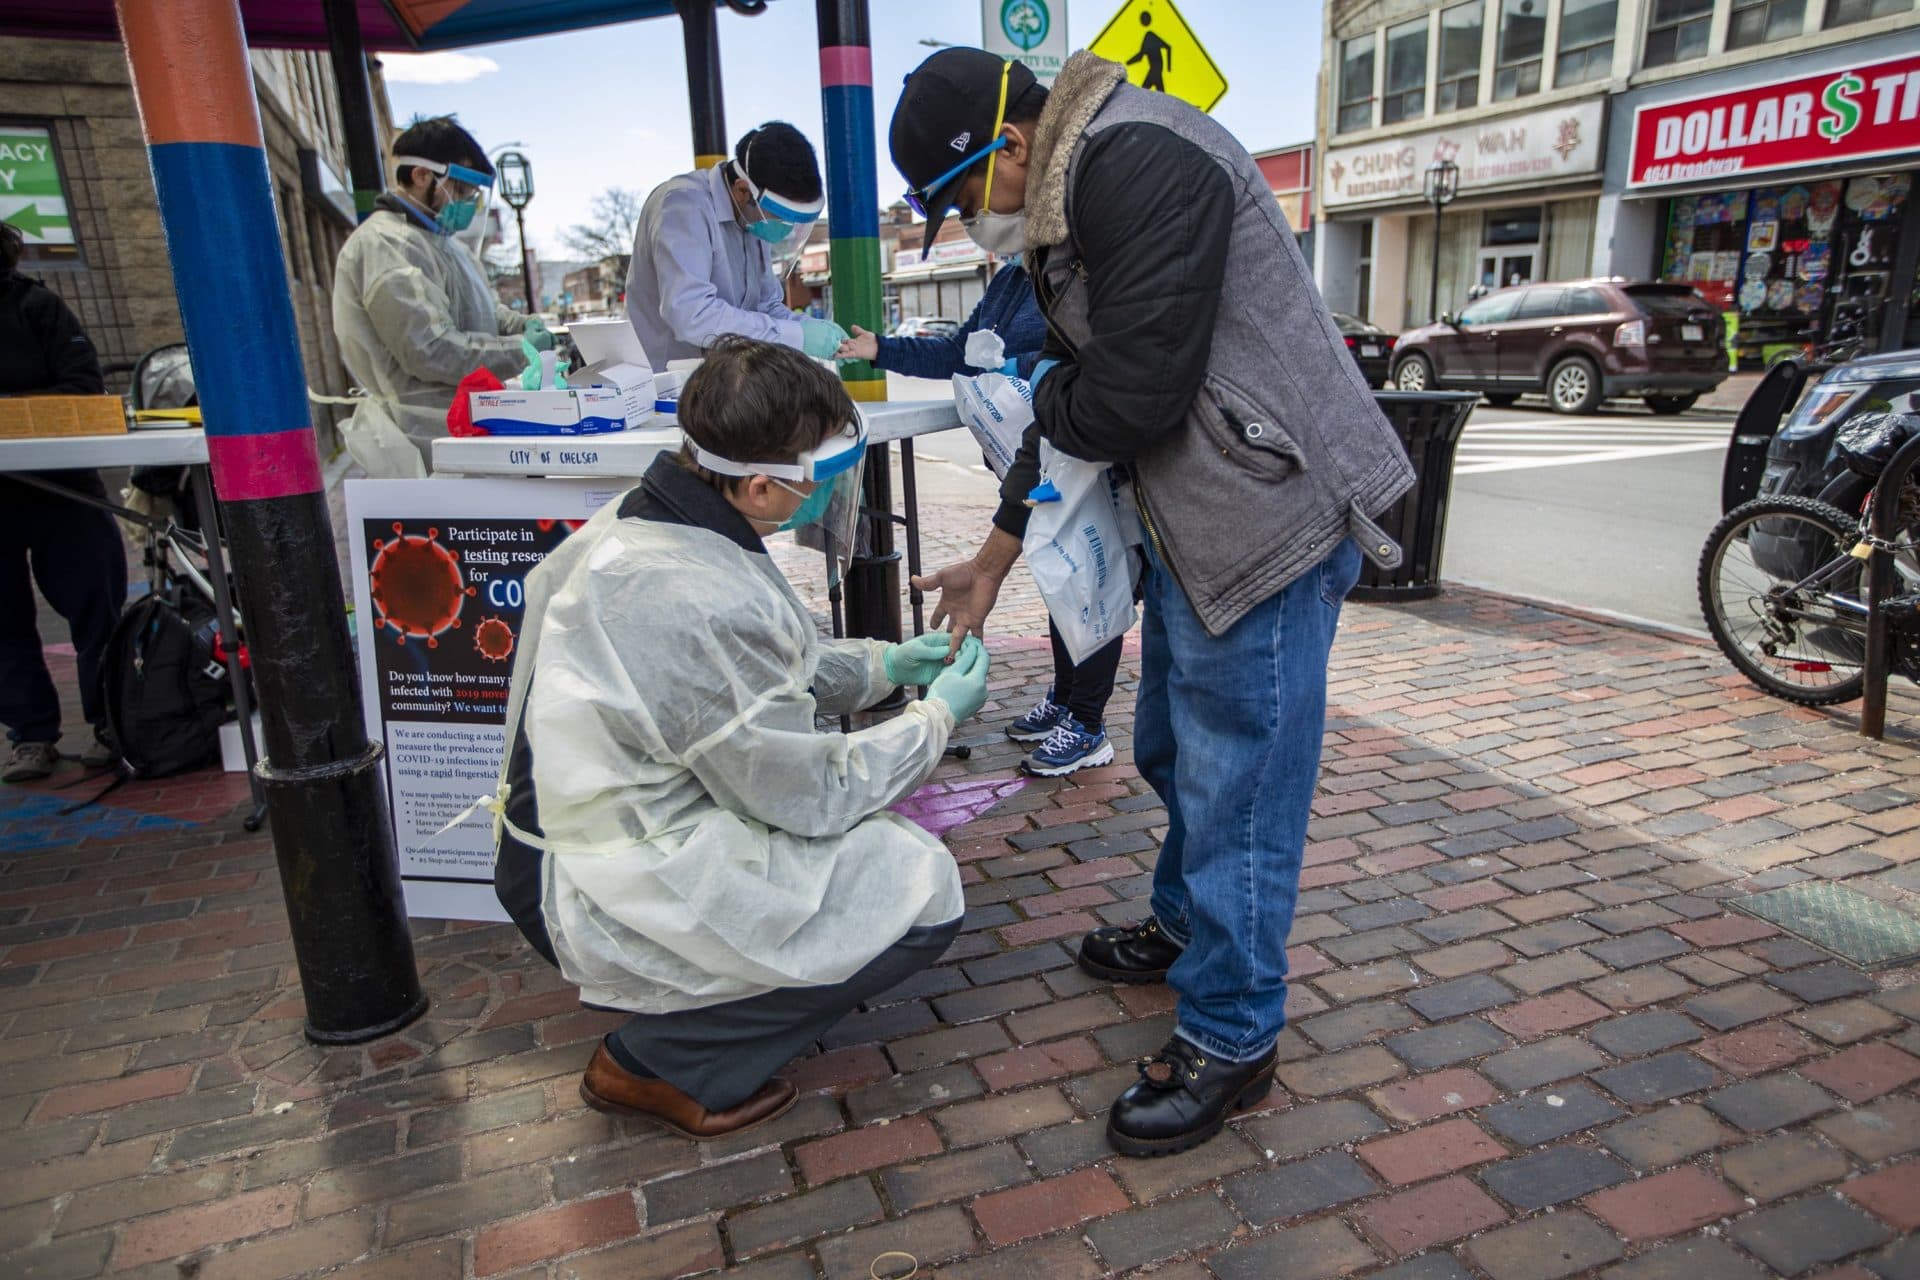 April 14: Dr. John Iafrate, a pathologist at Massachusetts General Hospital, takes a blood sample from a Chelsea resident at a pop-up testing facility in Bellingham Square. MGH is conducting a study by collecting the antibodies of Chelsea residents who have not tested positive for COVID-19, and they hope they will be able to measure the prevalence of infections in the community. (Jesse Costa/WBUR)